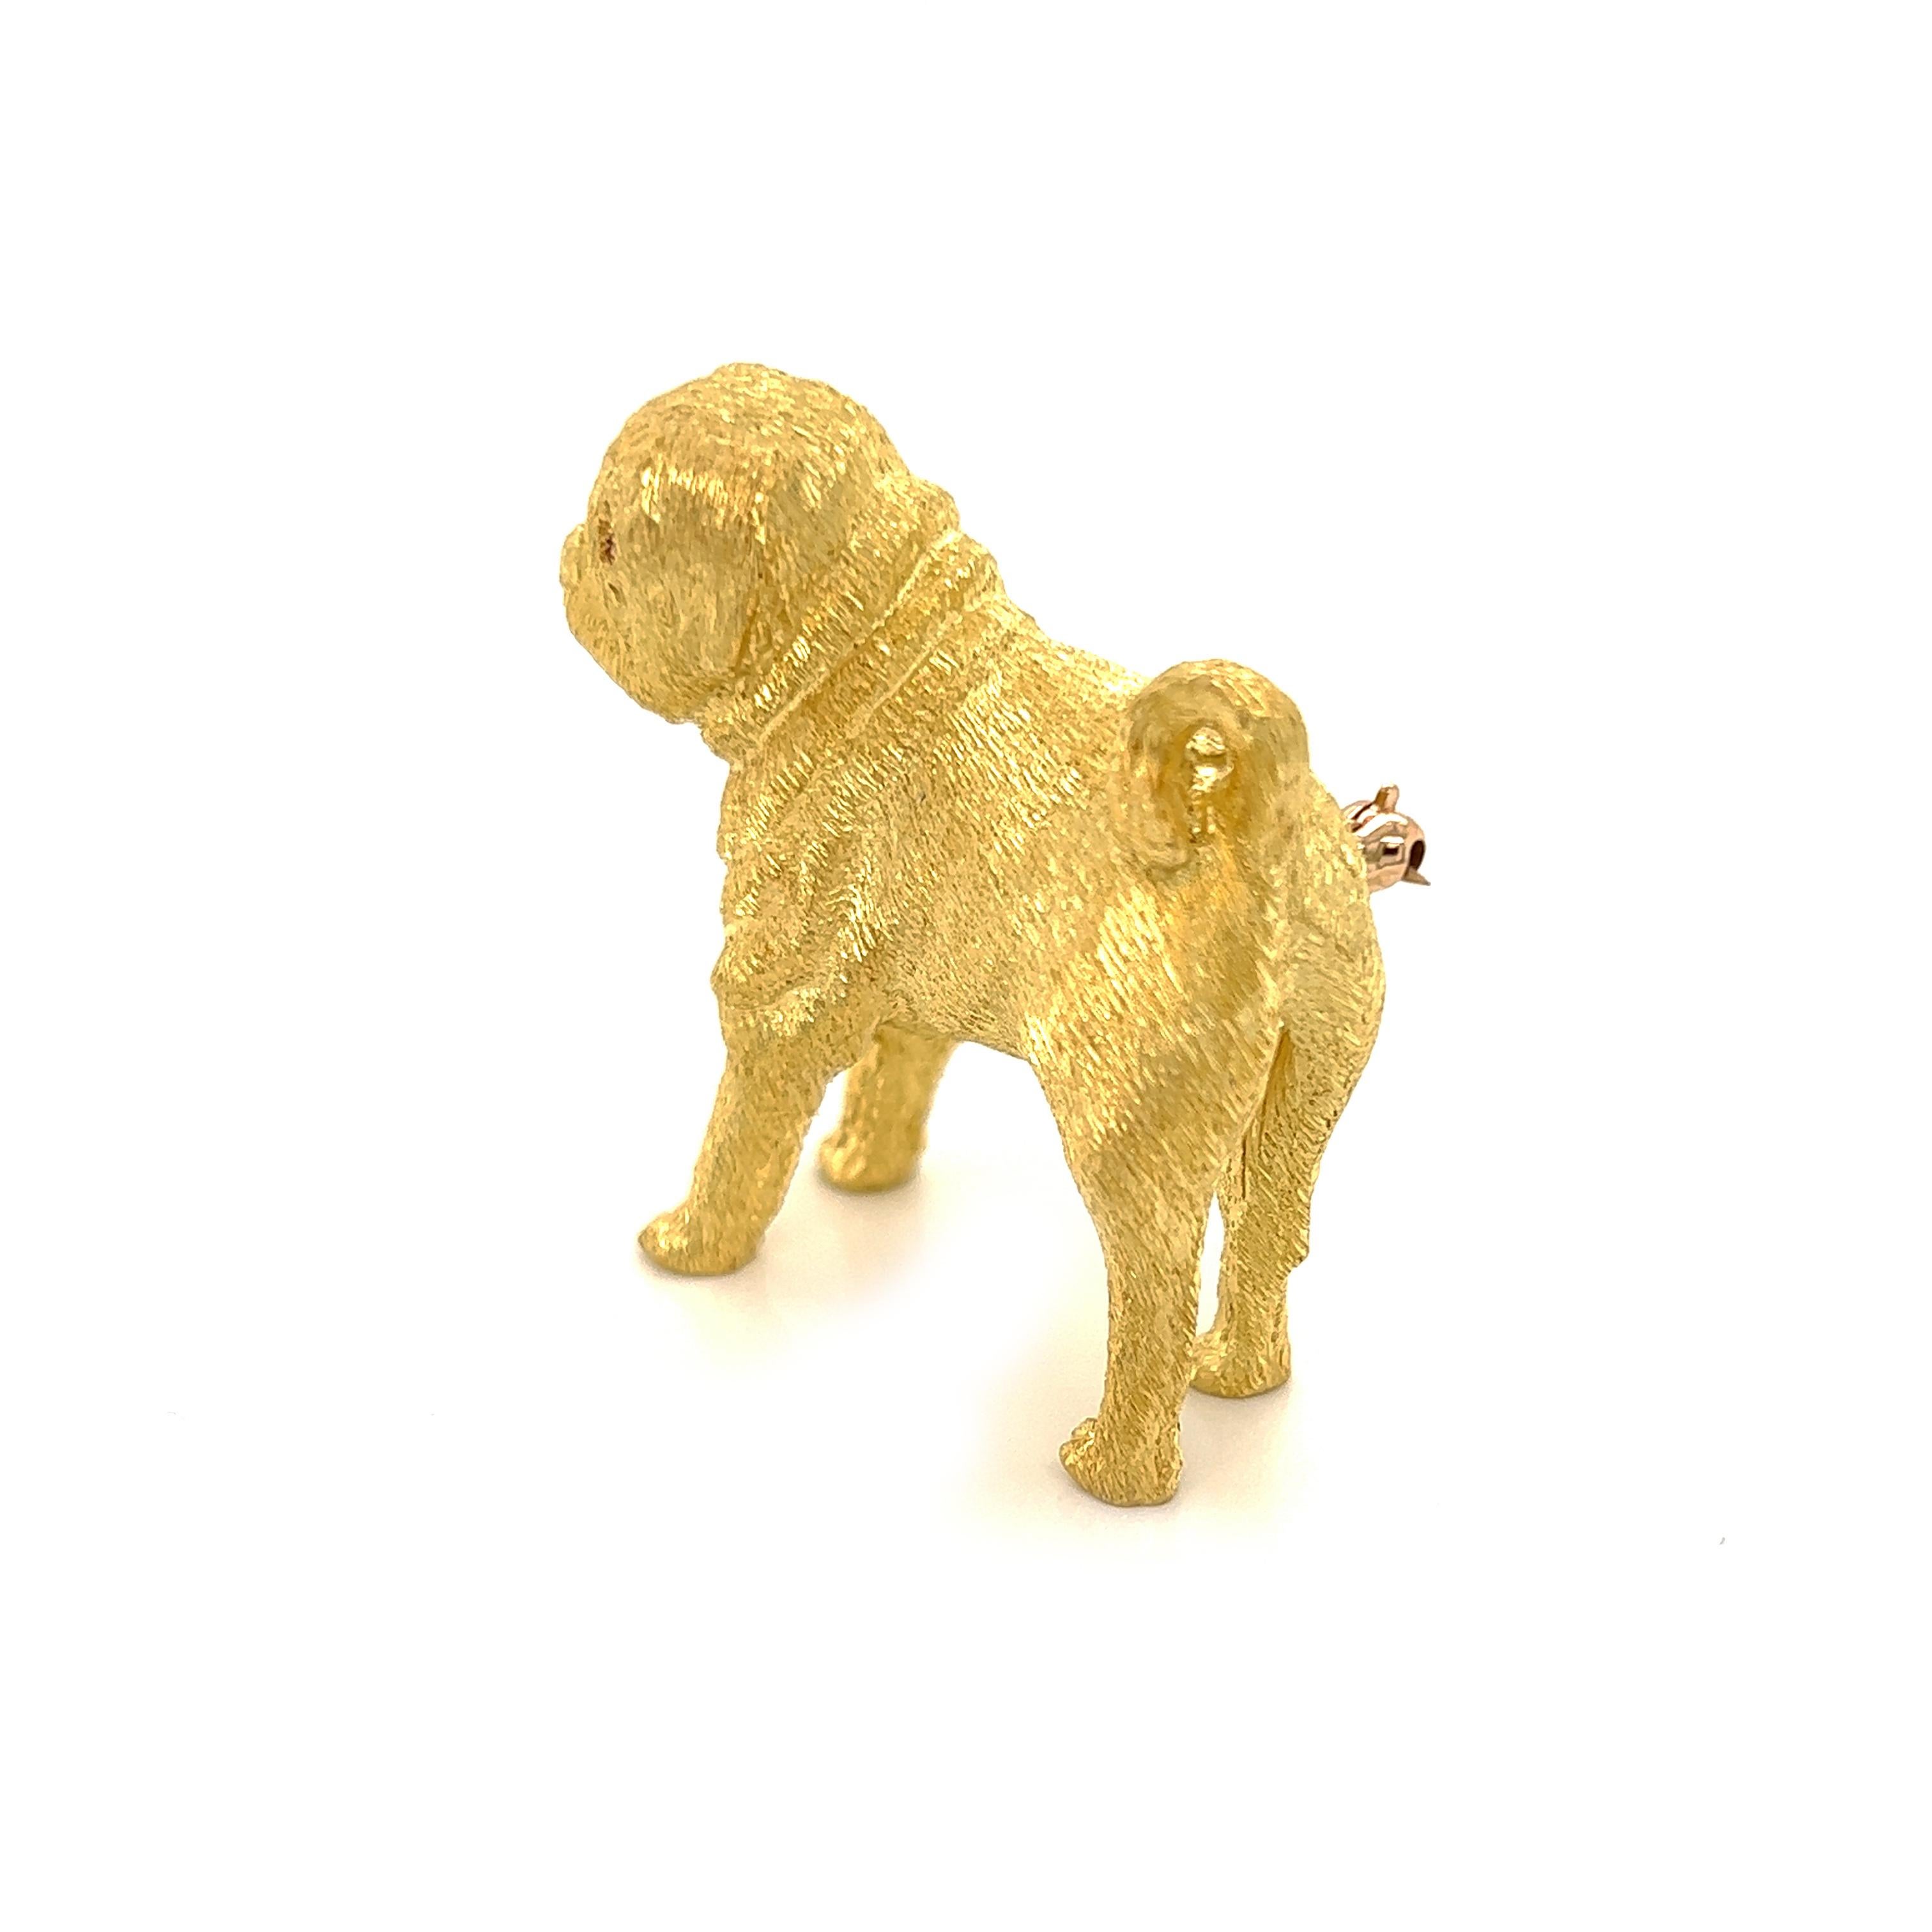 Brilliant Cut Solid 3D Full Figure Standing Pug Dog 18k Yellow Gold Brooch For Sale